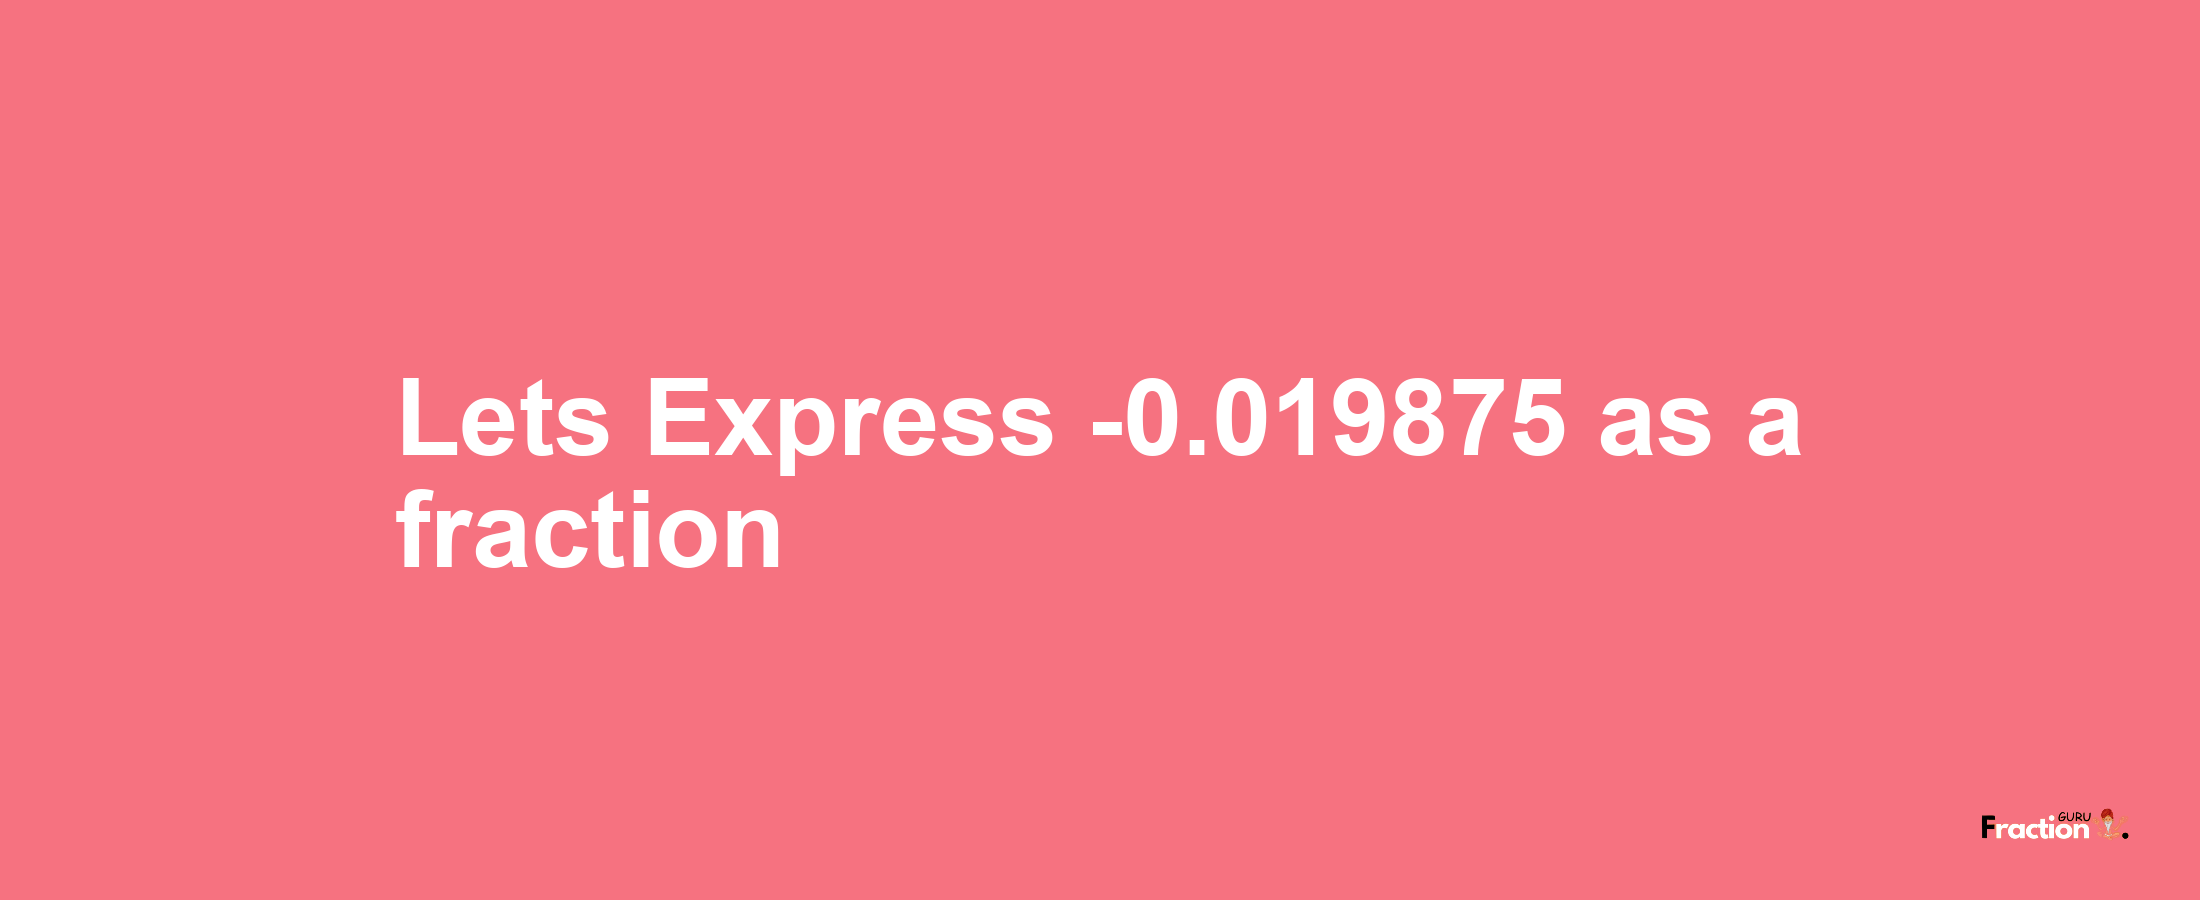 Lets Express -0.019875 as afraction